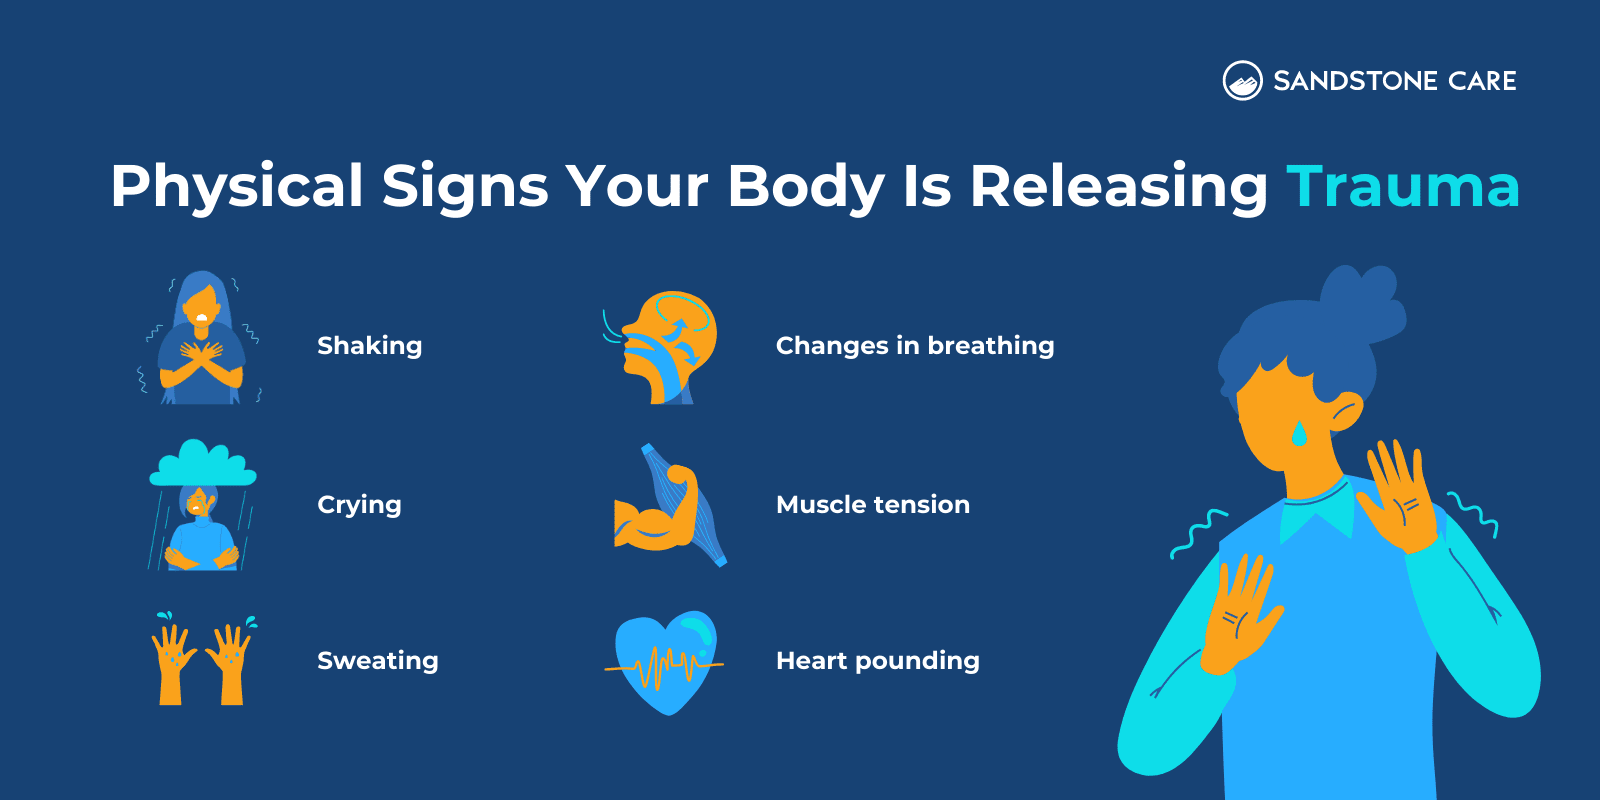 Physical signs your body is releasing trauma